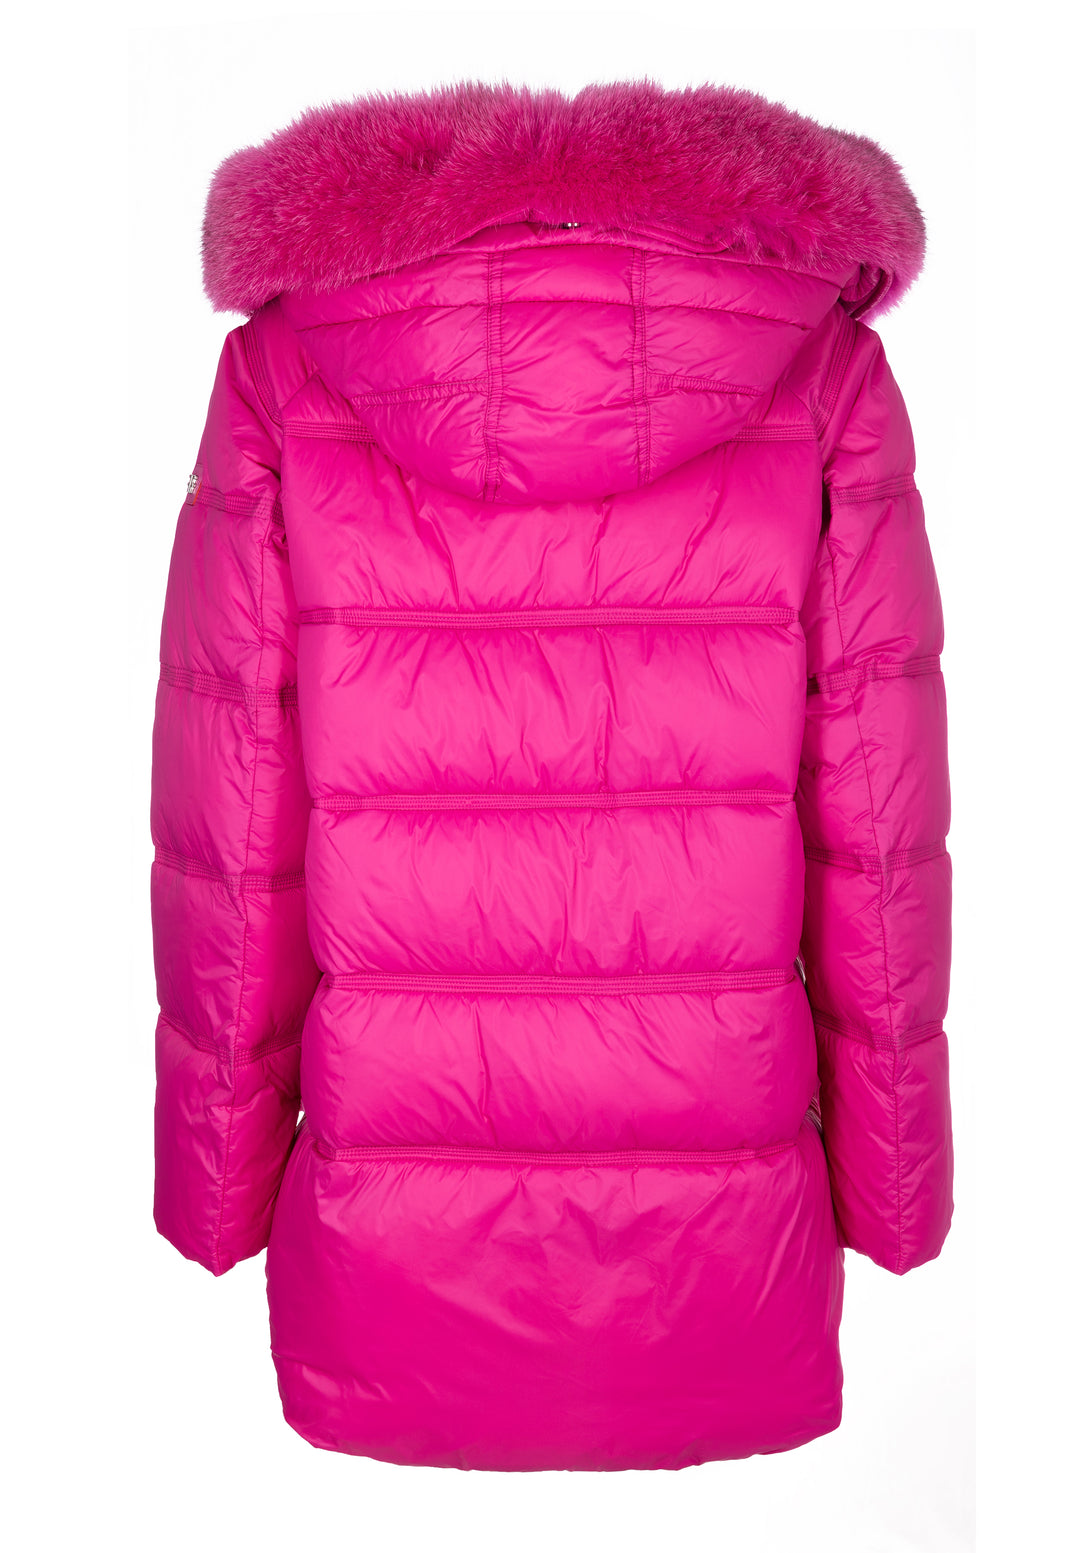 Padded jacket regular fit with hood